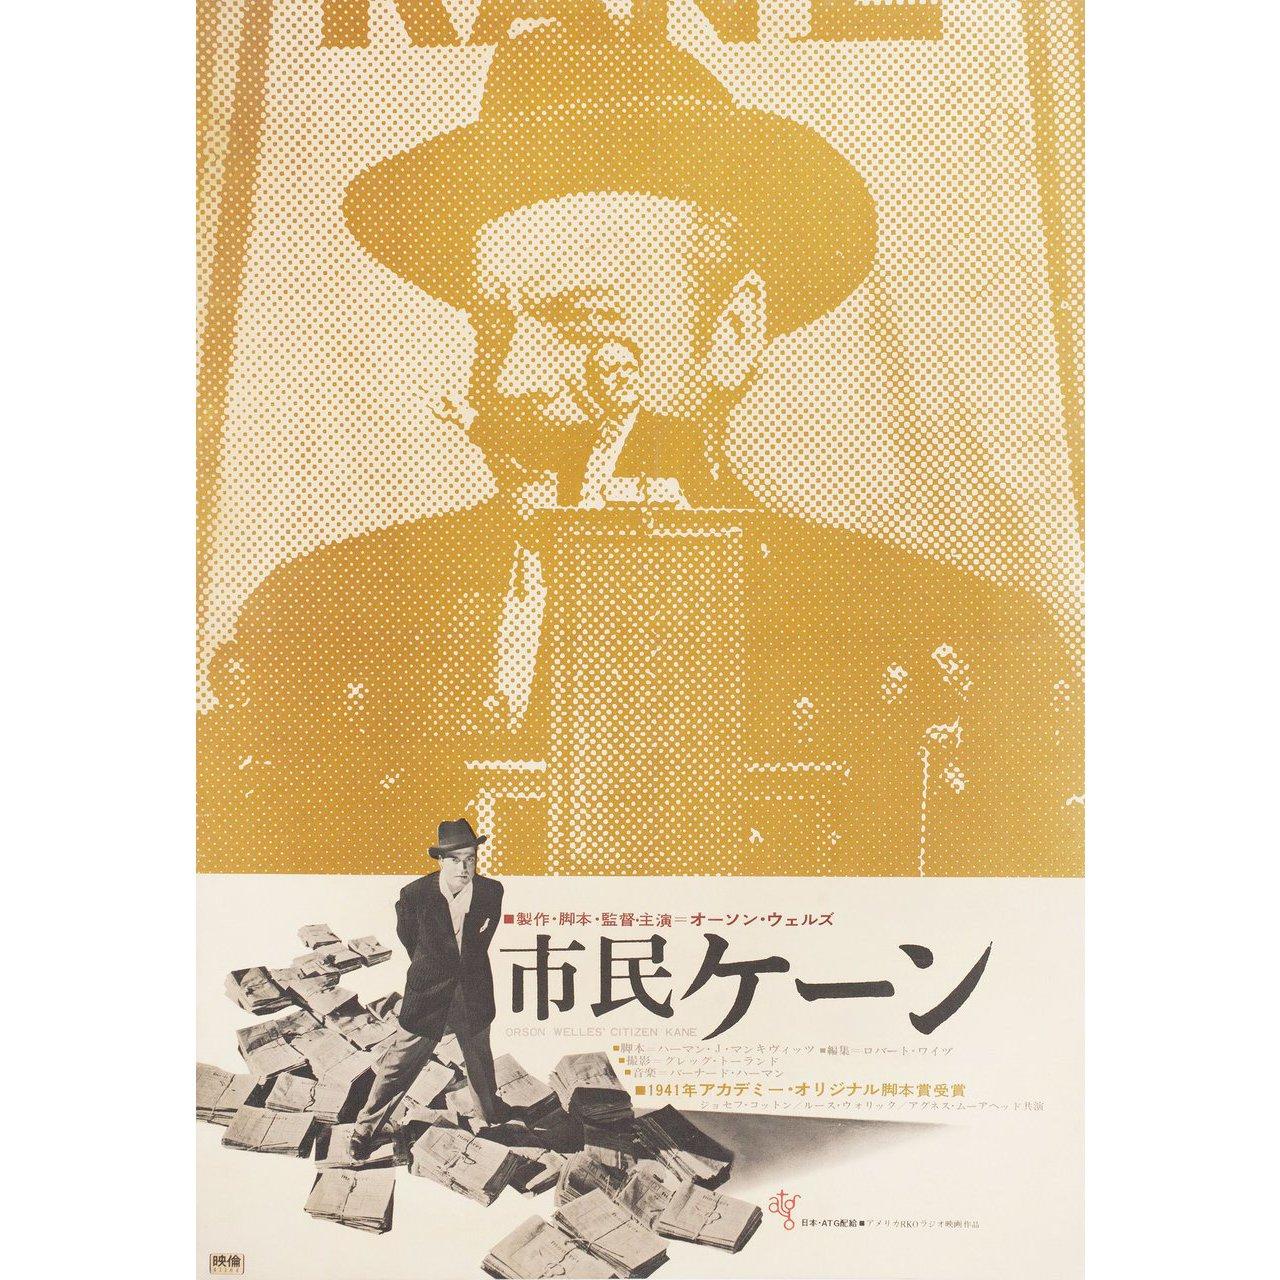 Original 1966 Japanese B2 poster for the first Japanese theatrical release of the 1941 film Citizen Kane directed by Orson Welles with Joseph Cotten / Dorothy Comingore / Agnes Moorehead / Ruth Warrick. Fine condition, linen-backed. This poster has